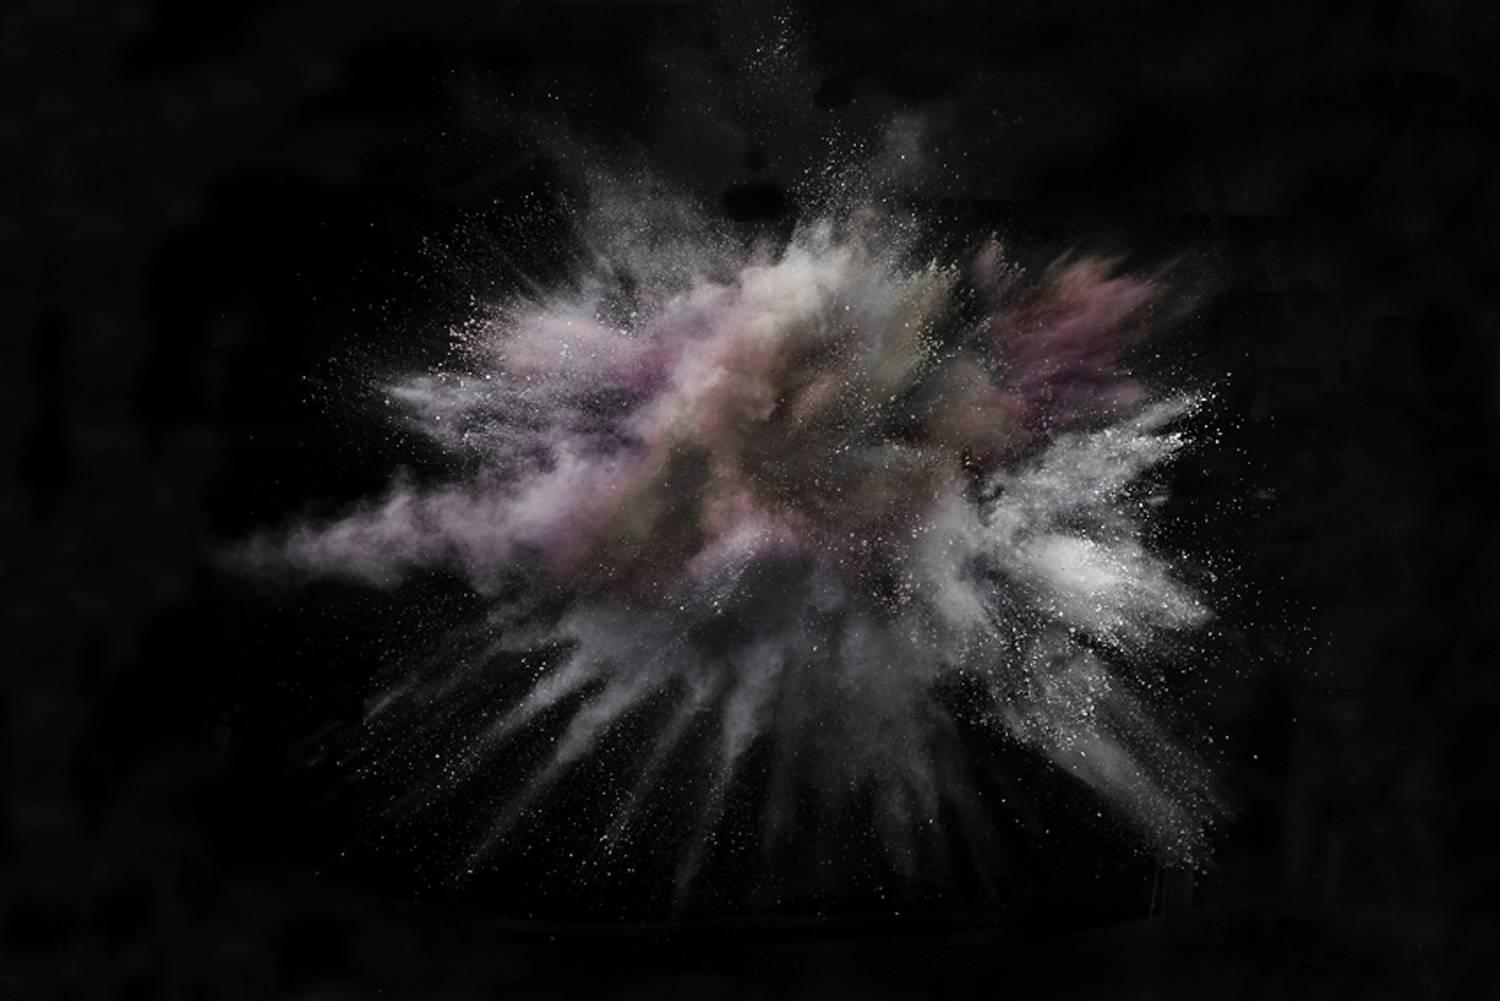 Burst II - limited edition photograph in archival artwork portfolio gift binder - Print by Christian Stoll